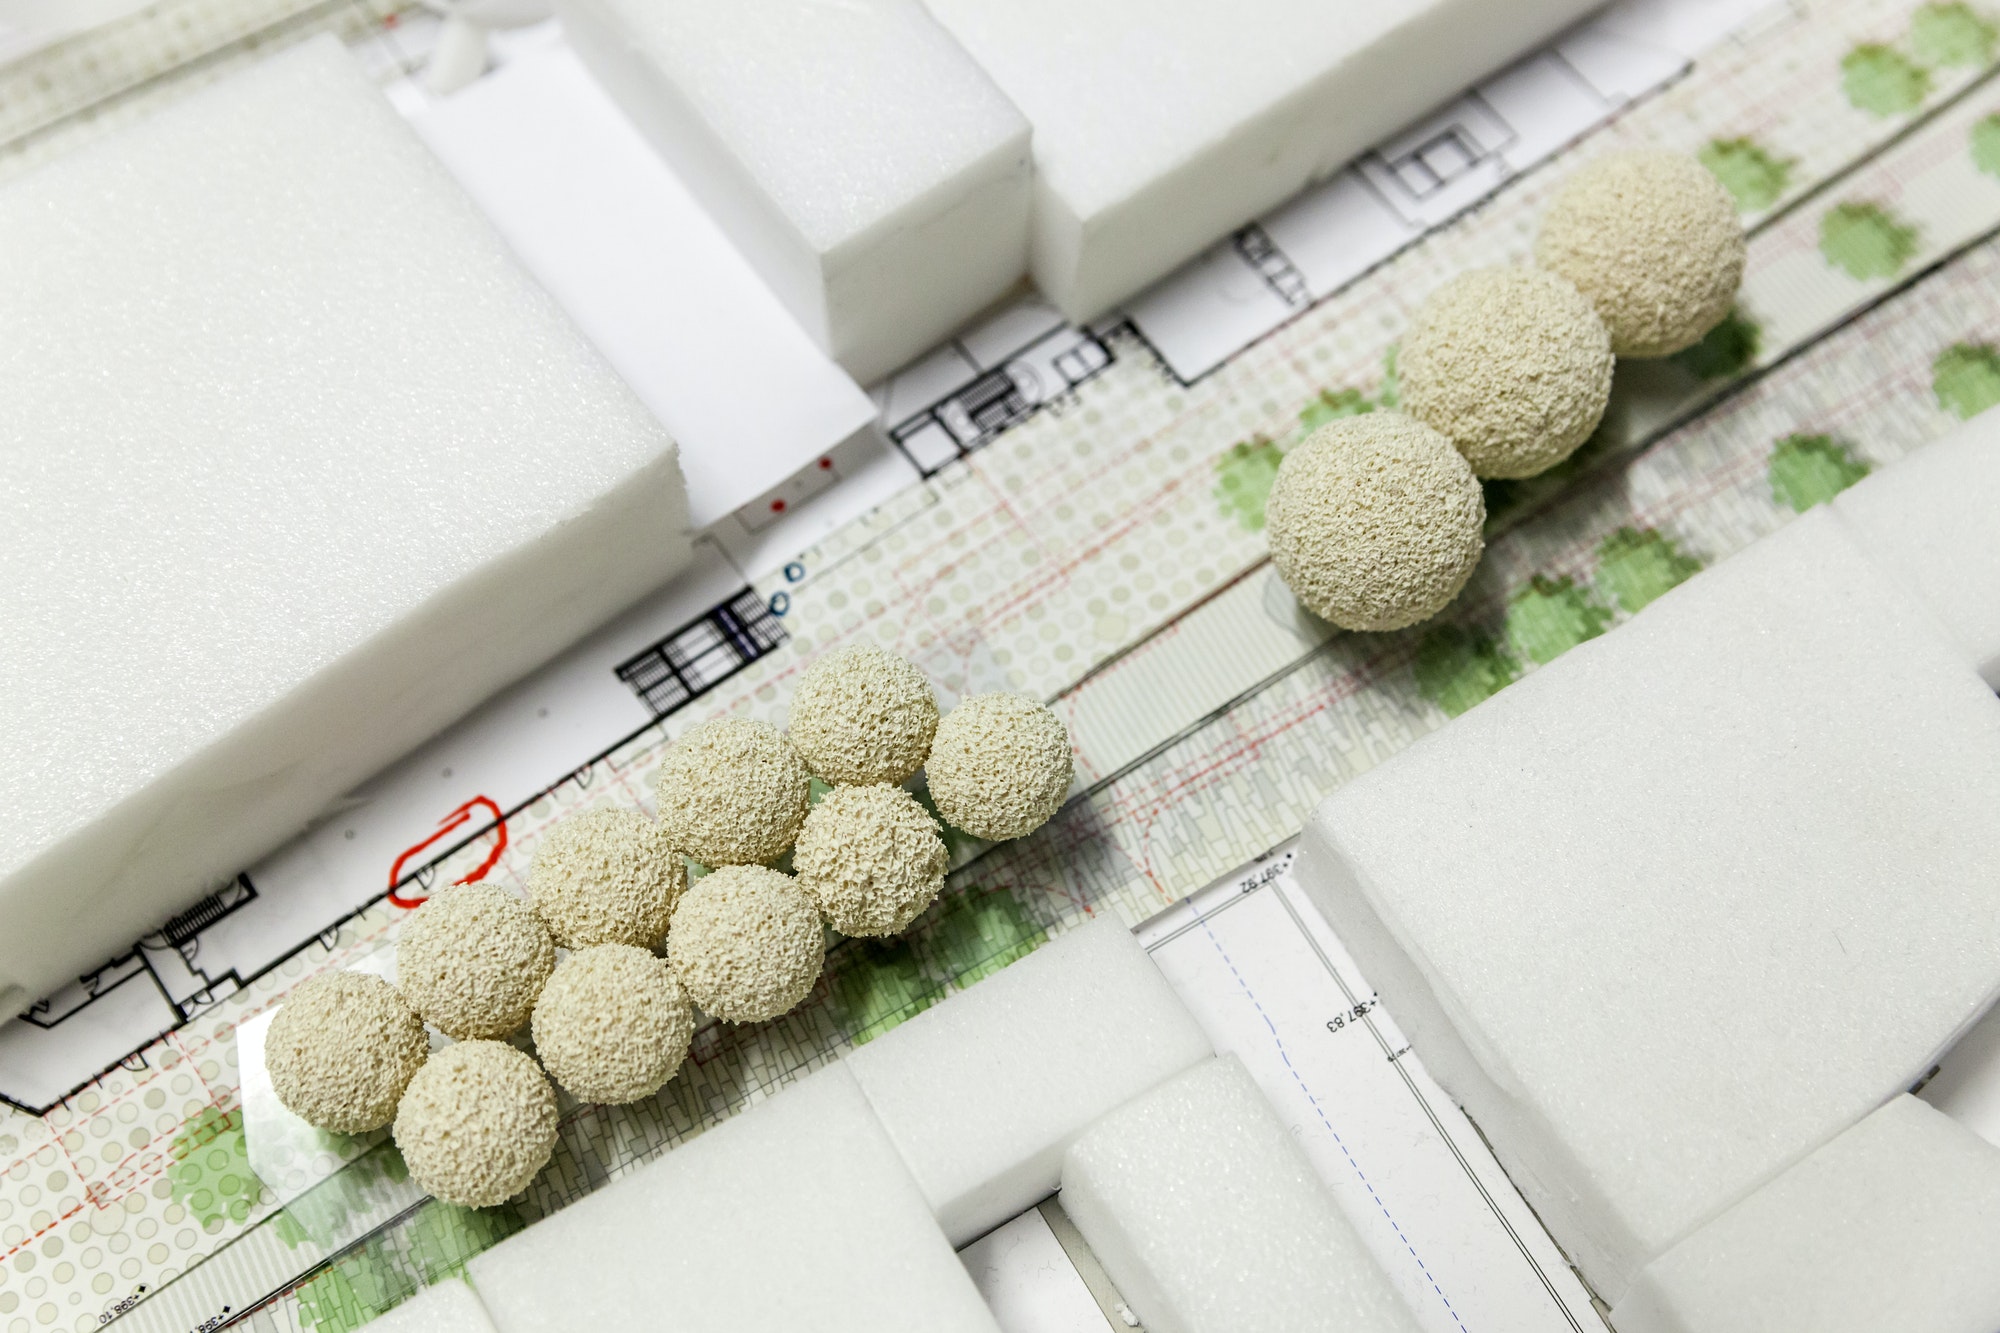 Architectural model, close-up